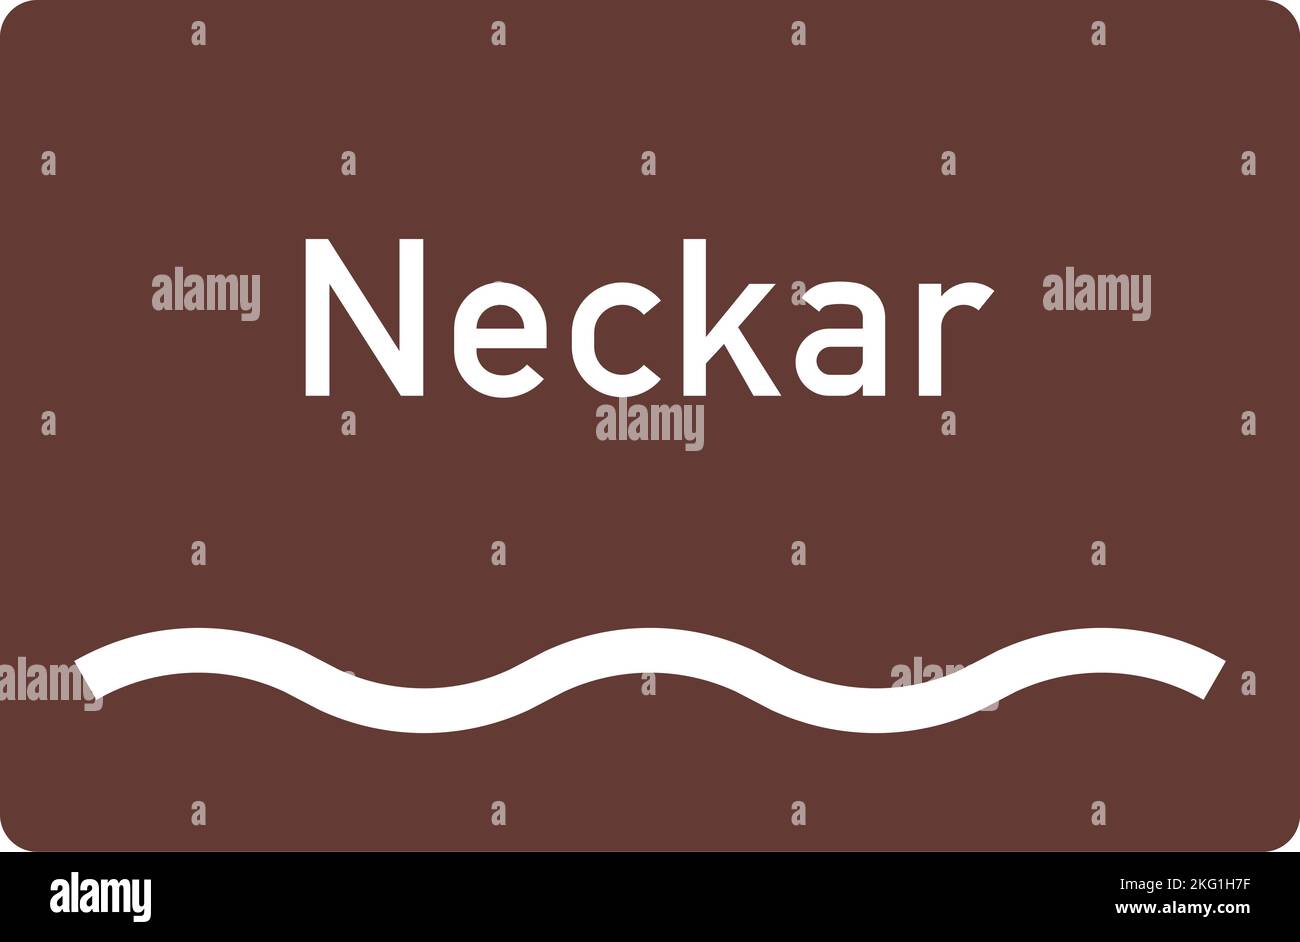 The wave symbol indicates a tourist attraction water body. Necker is the name of a river in Germany. Tourist Information Signs, Road signs Stock Vector